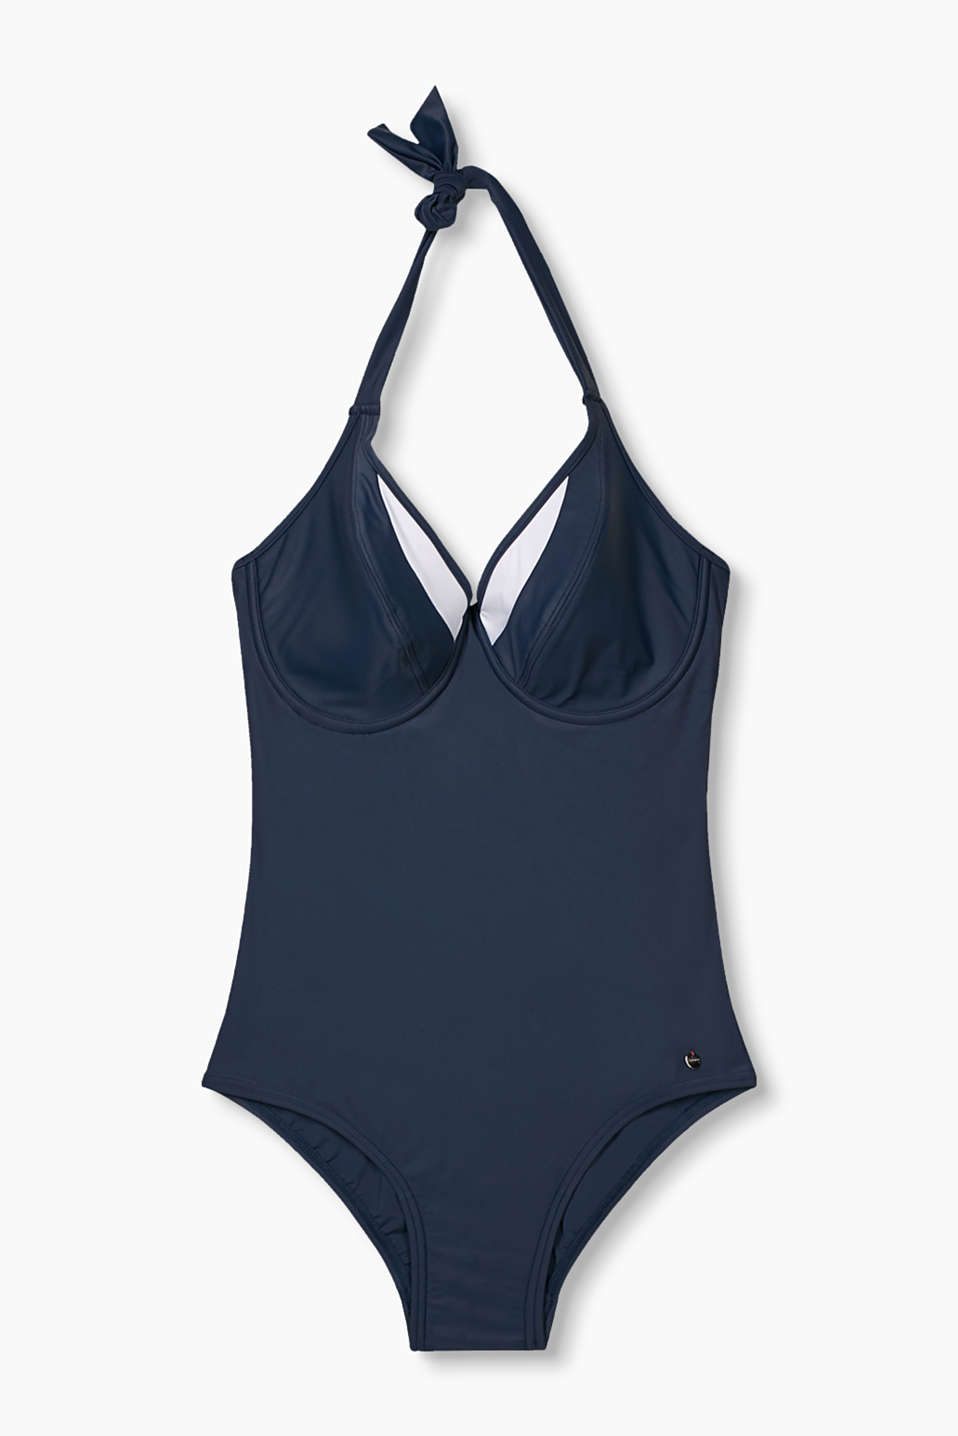 Esprit - Padded swimsuit for large cup sizes at our Online Shop